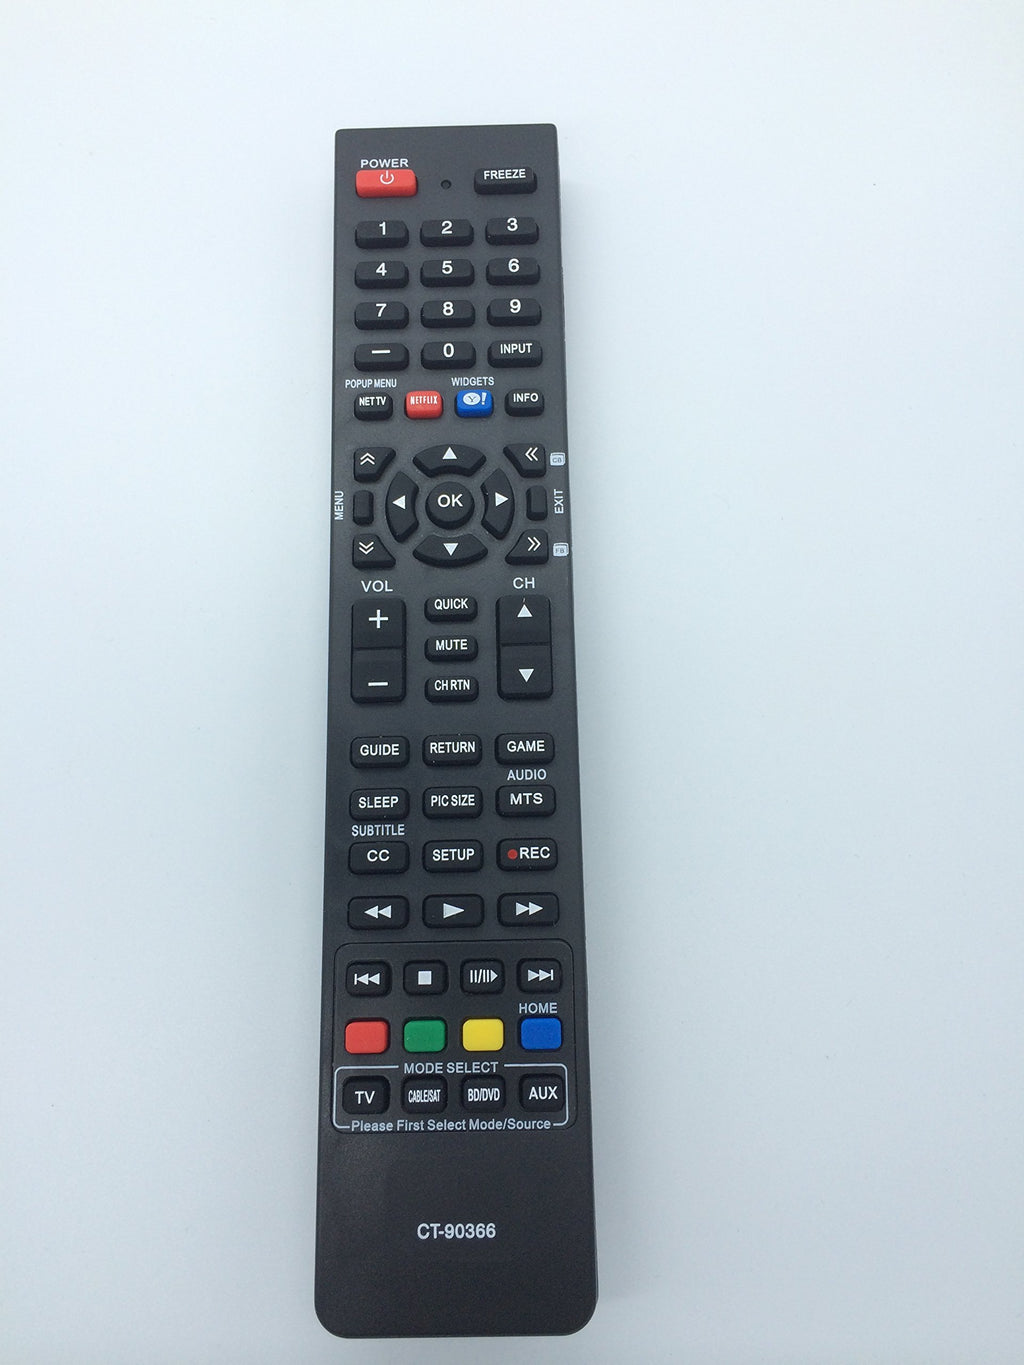 New Replaced Remote CT-90366 fit for Toshiba tv 32SL415 24SL415 40S51U 42SL417 42SL417U 46SL417 46SL417U 24SL415U 32SL415Y 55SL417U 24SL415UM 55SL417 32SL415U